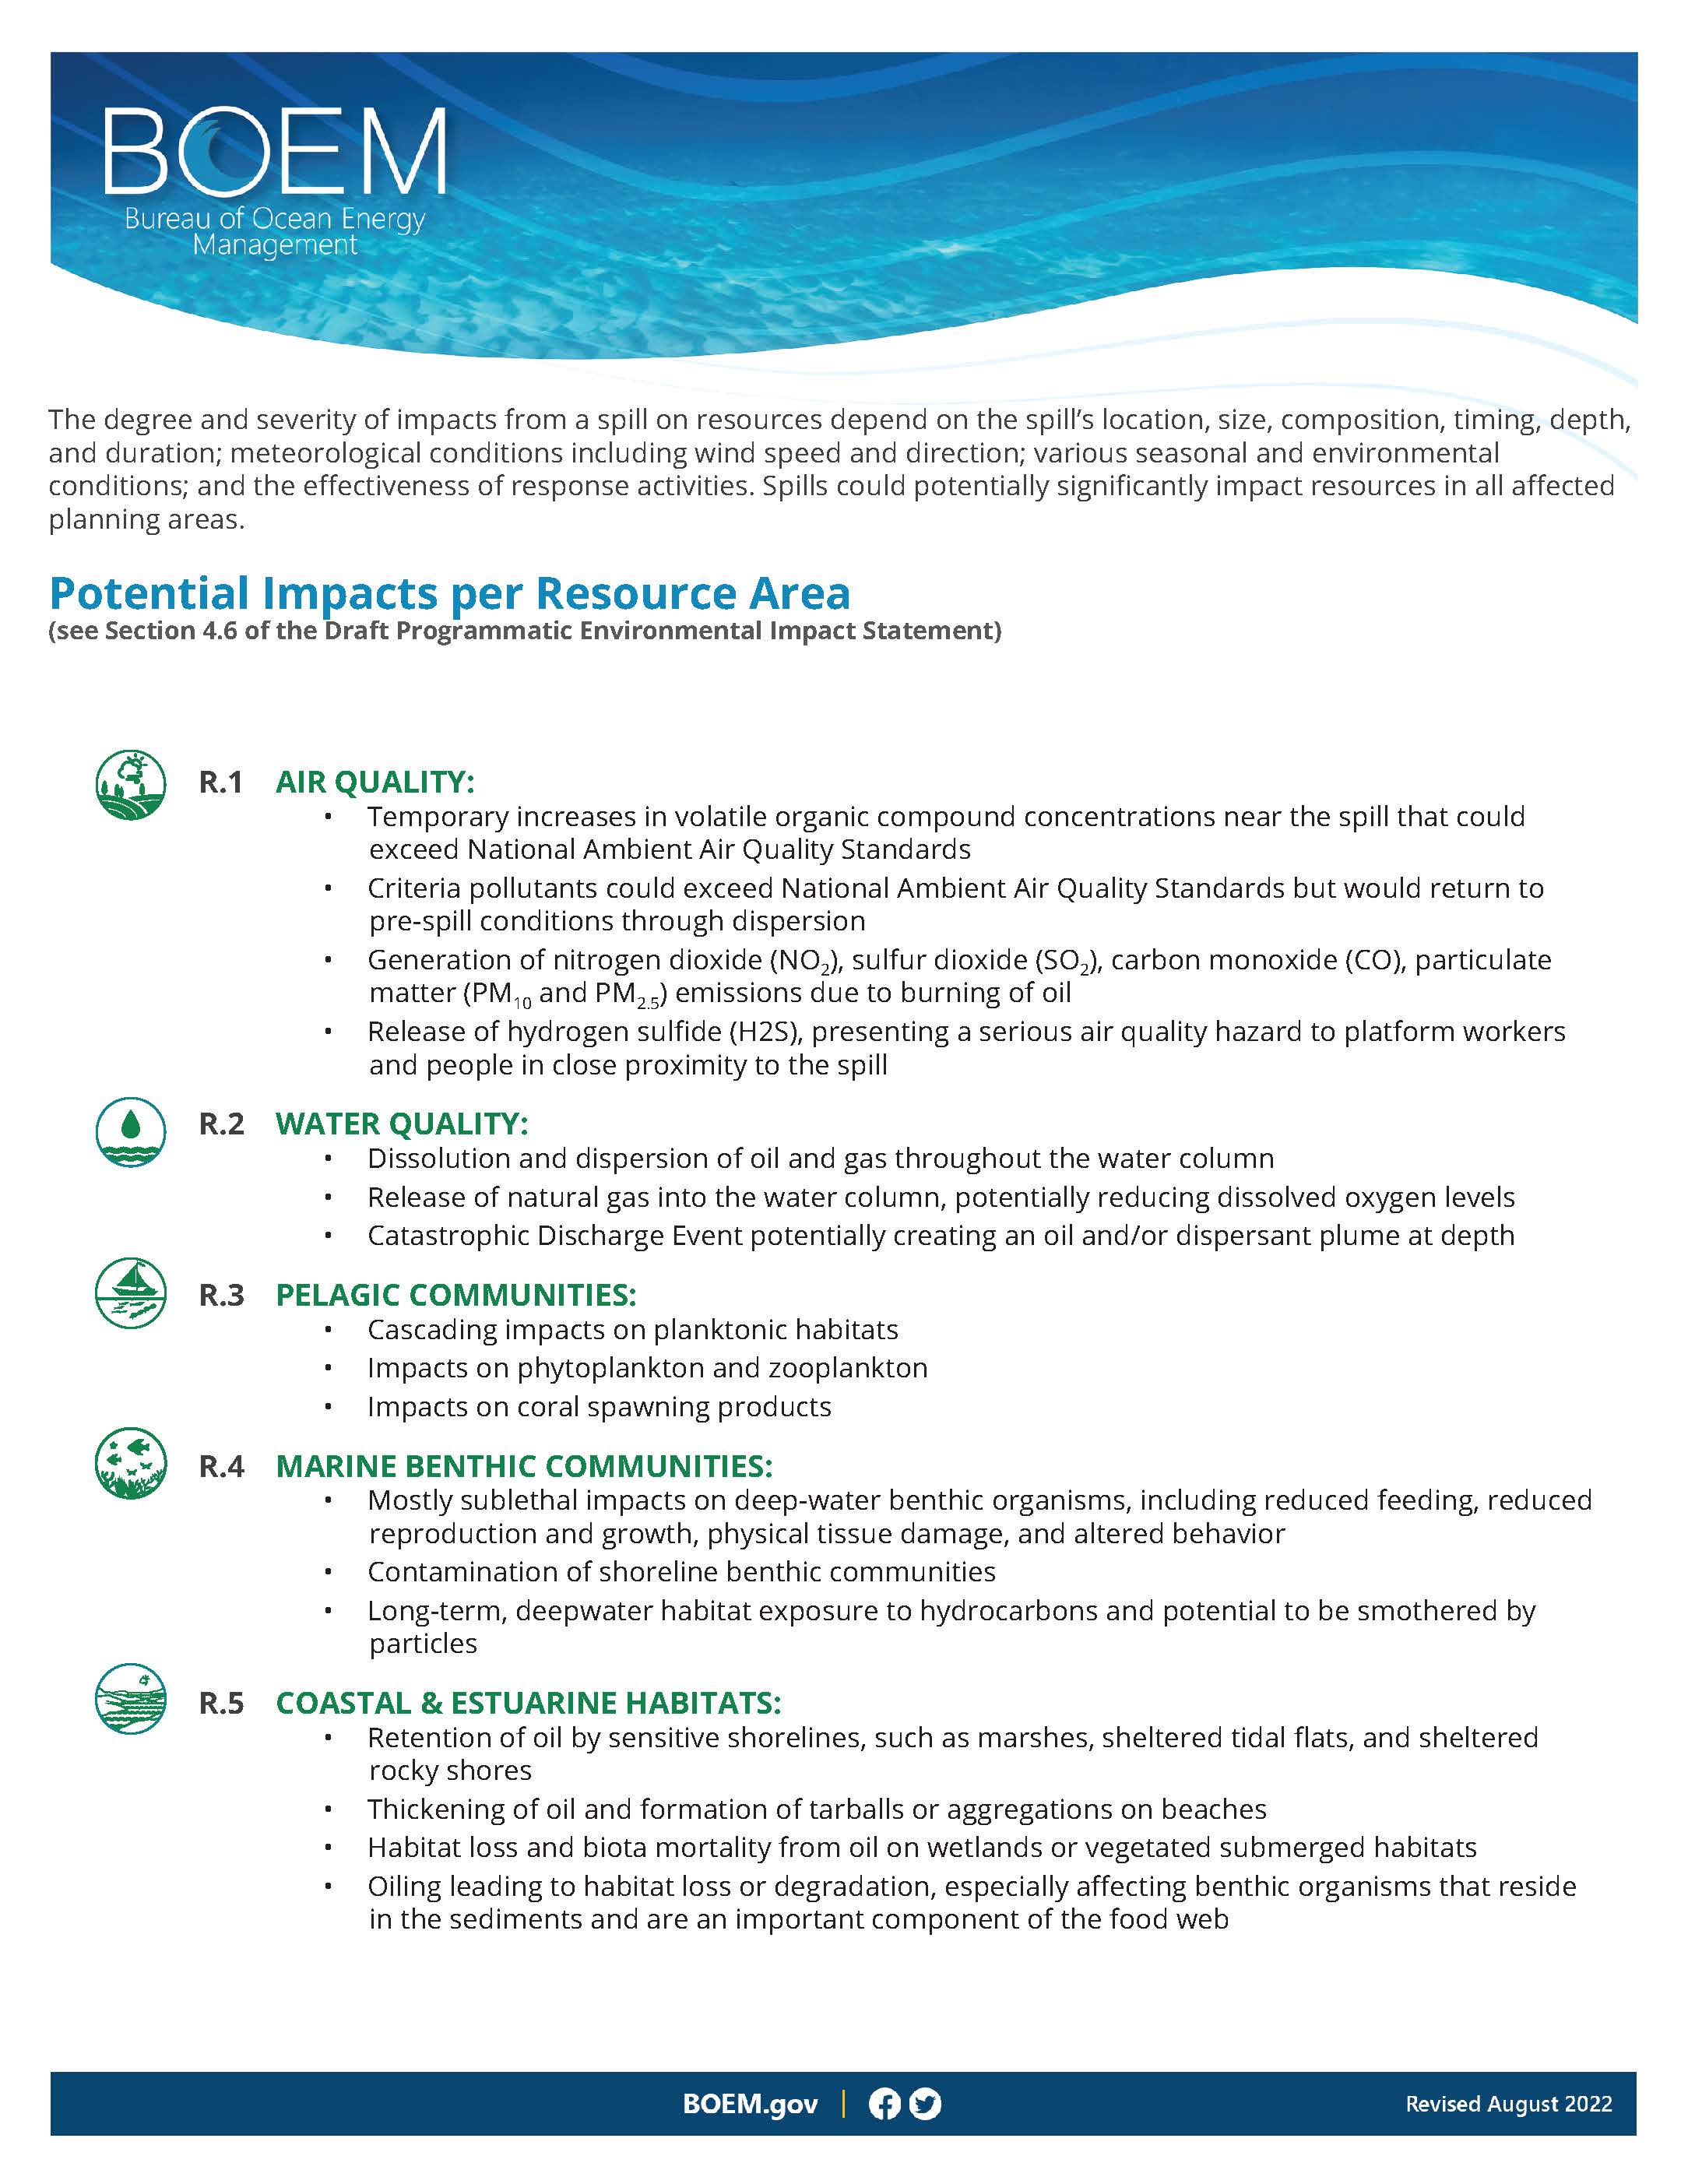 Potential Impacts of Oil Spills